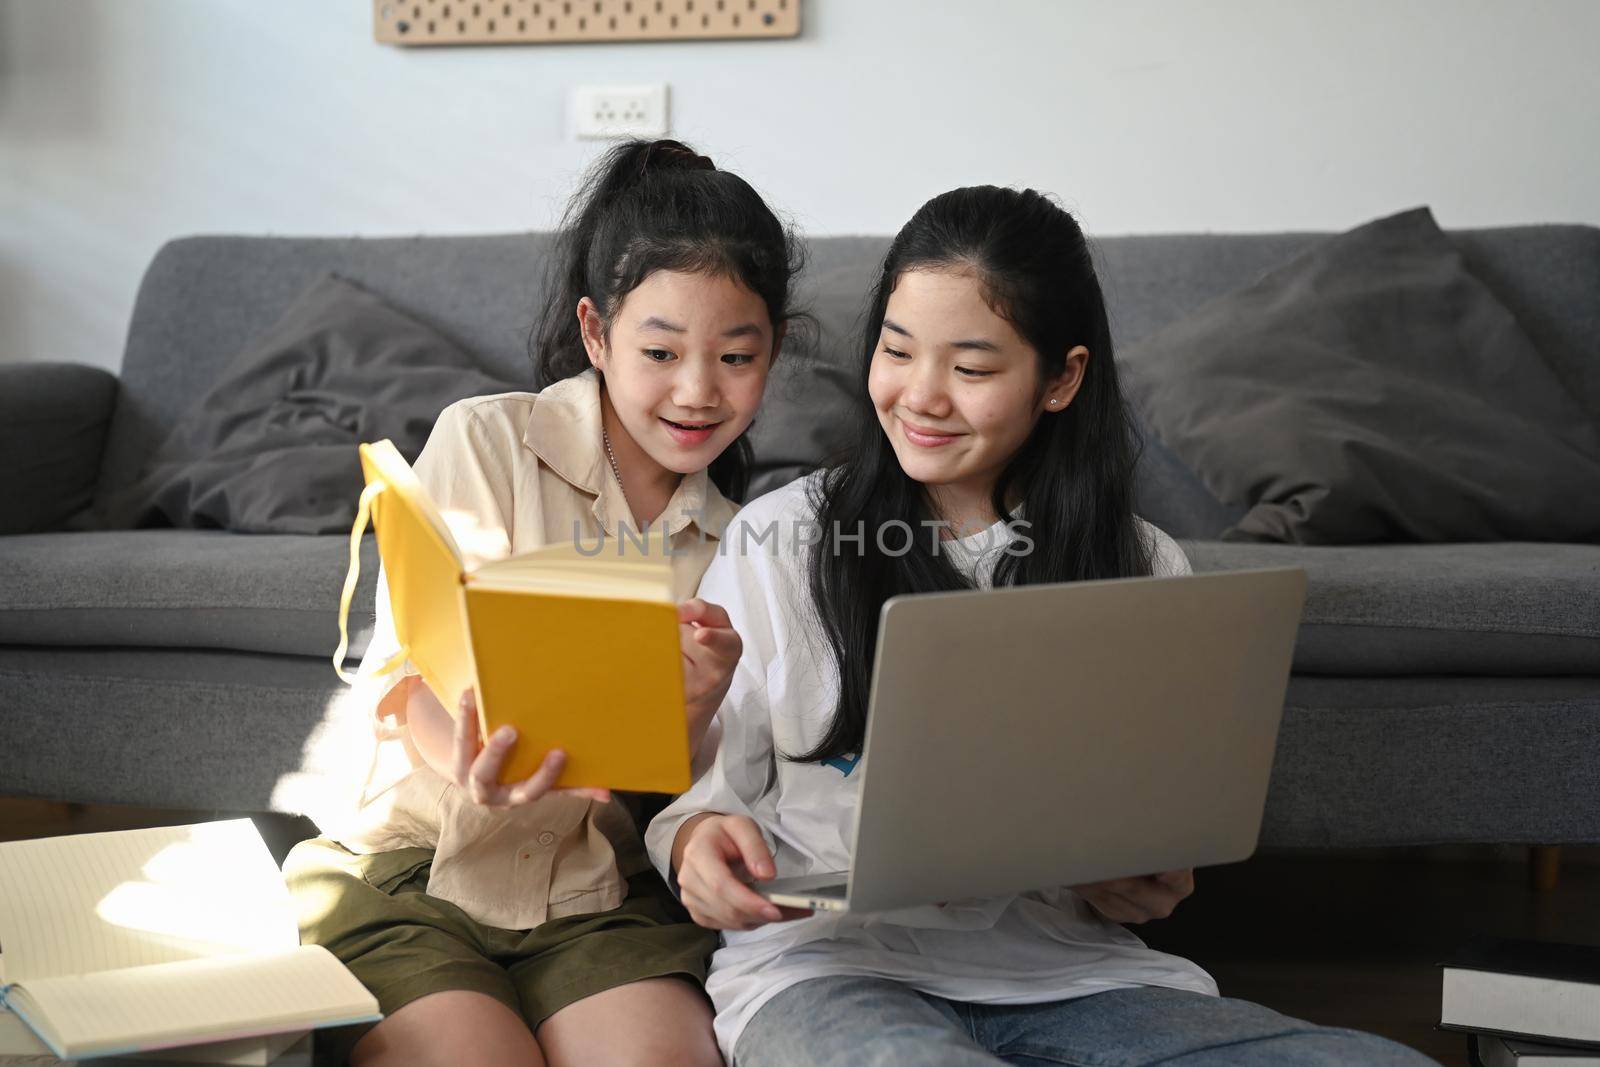 Smiling asian girl using laptop and her younger sister reading book while sitting together in living room.